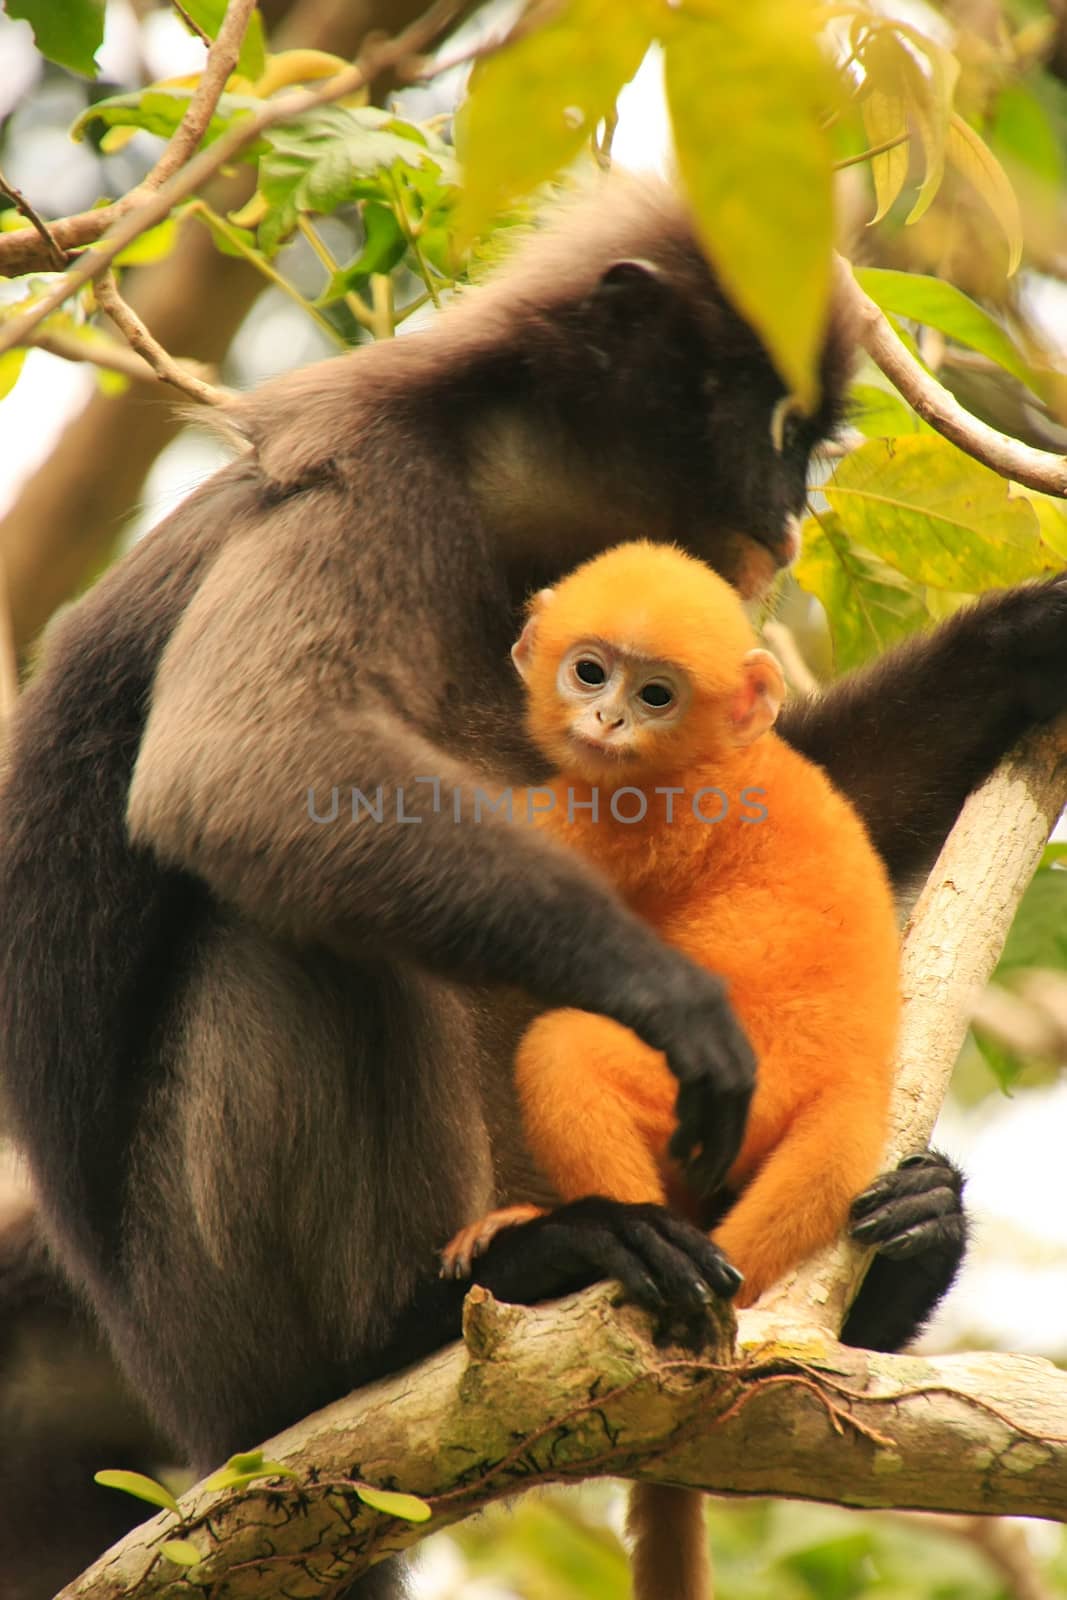 Spectacled langur sitting in a tree with a baby, Wua Talap island, Ang Thong National Marine Park, Thailand